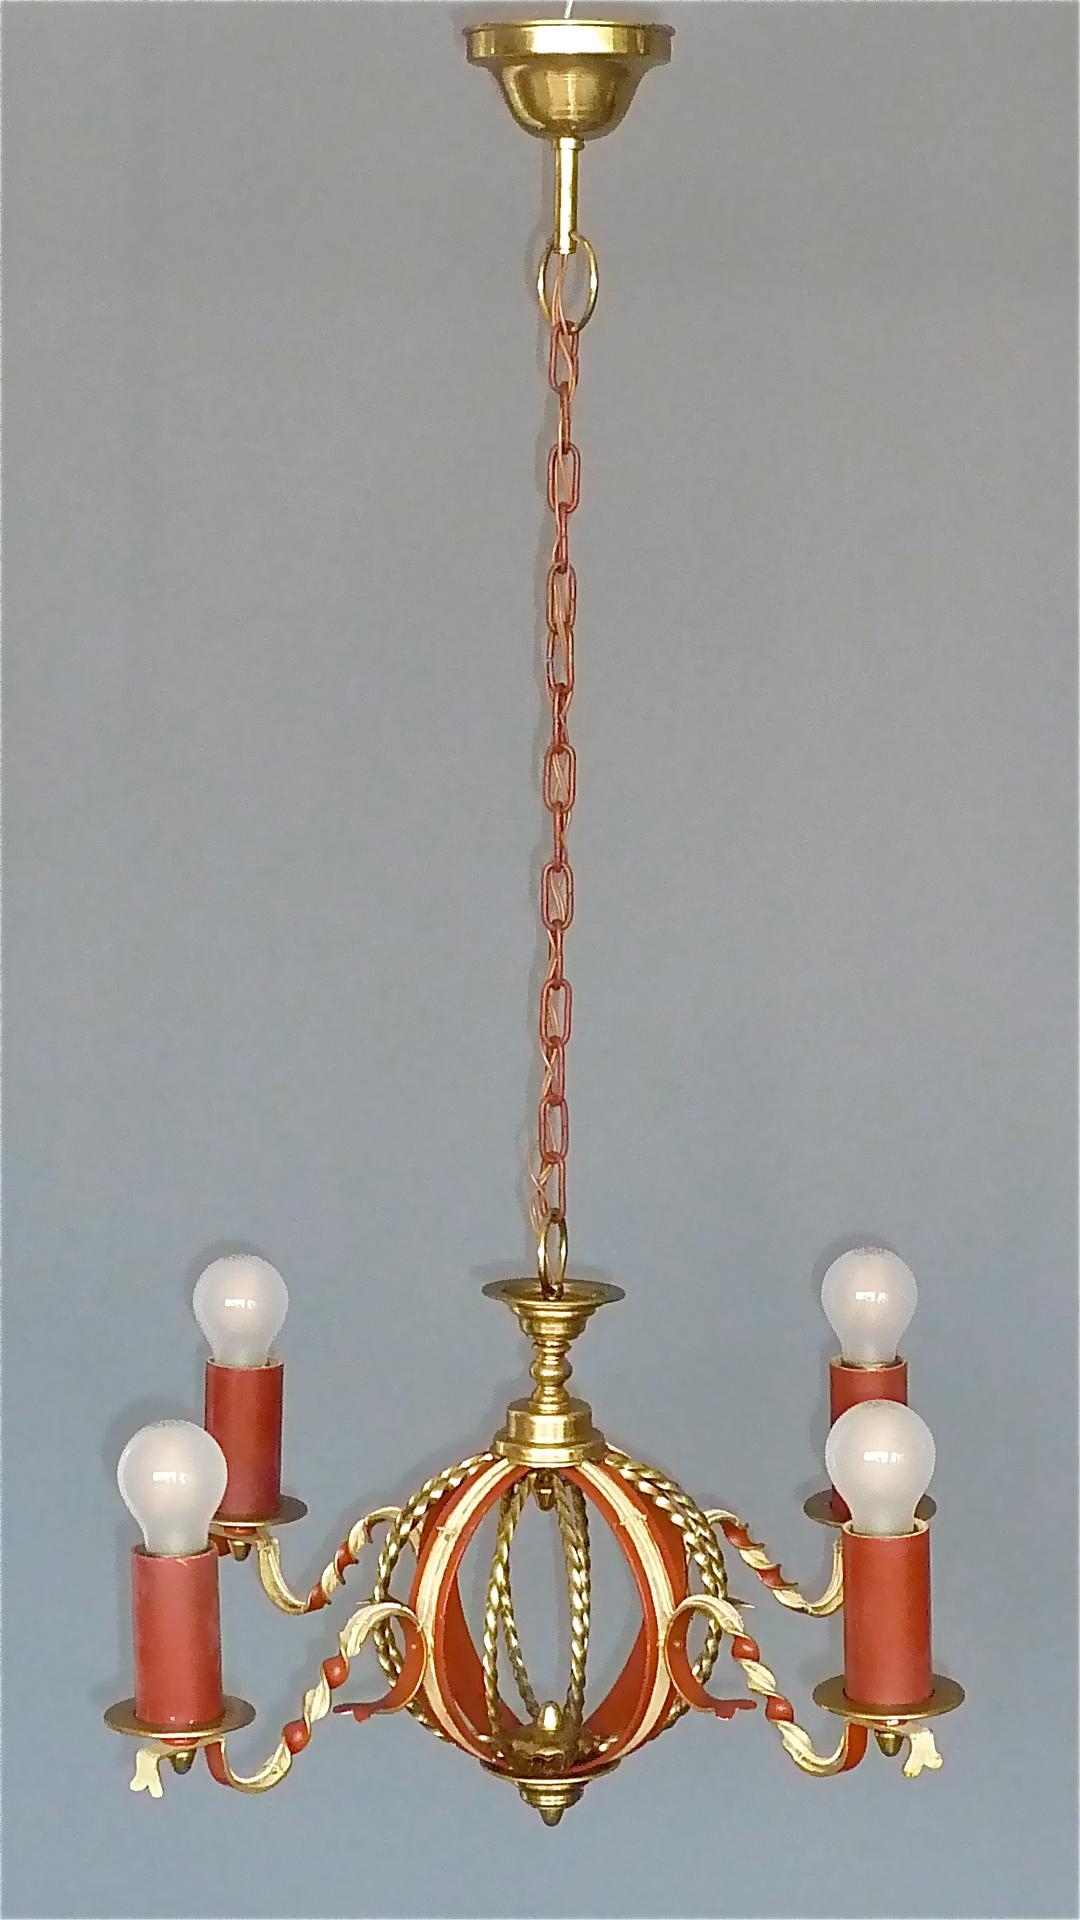 Mid-Century Modern Large French Poillerat Style Globe Chandelier Wrought Iron Brass 1950s no.2 of 2 For Sale